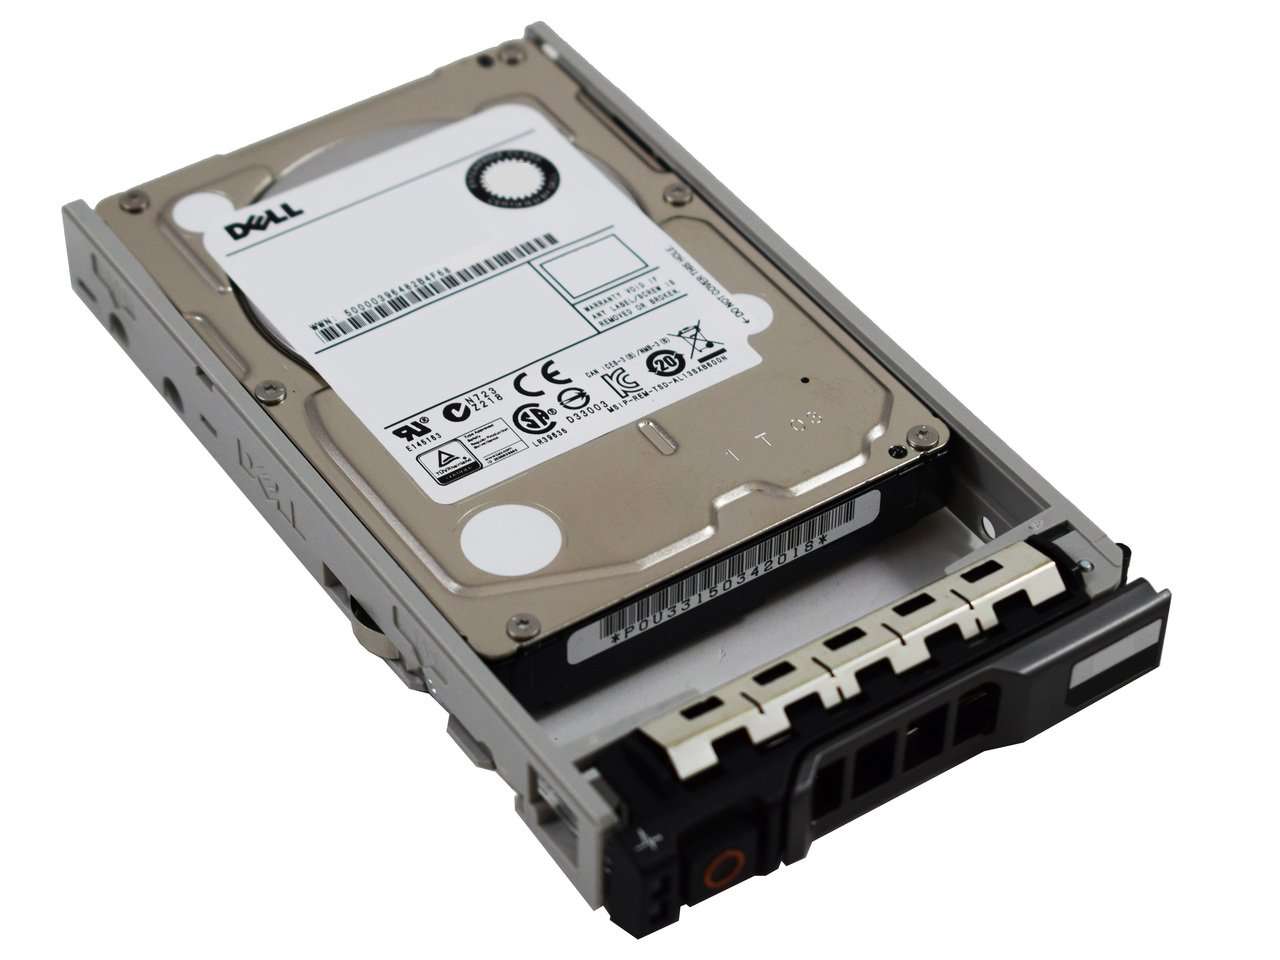 Dell G13 C5R62 600GB 10K RPM SAS 6Gb/s 512n 2.5" Manufacturer Recertified HDD